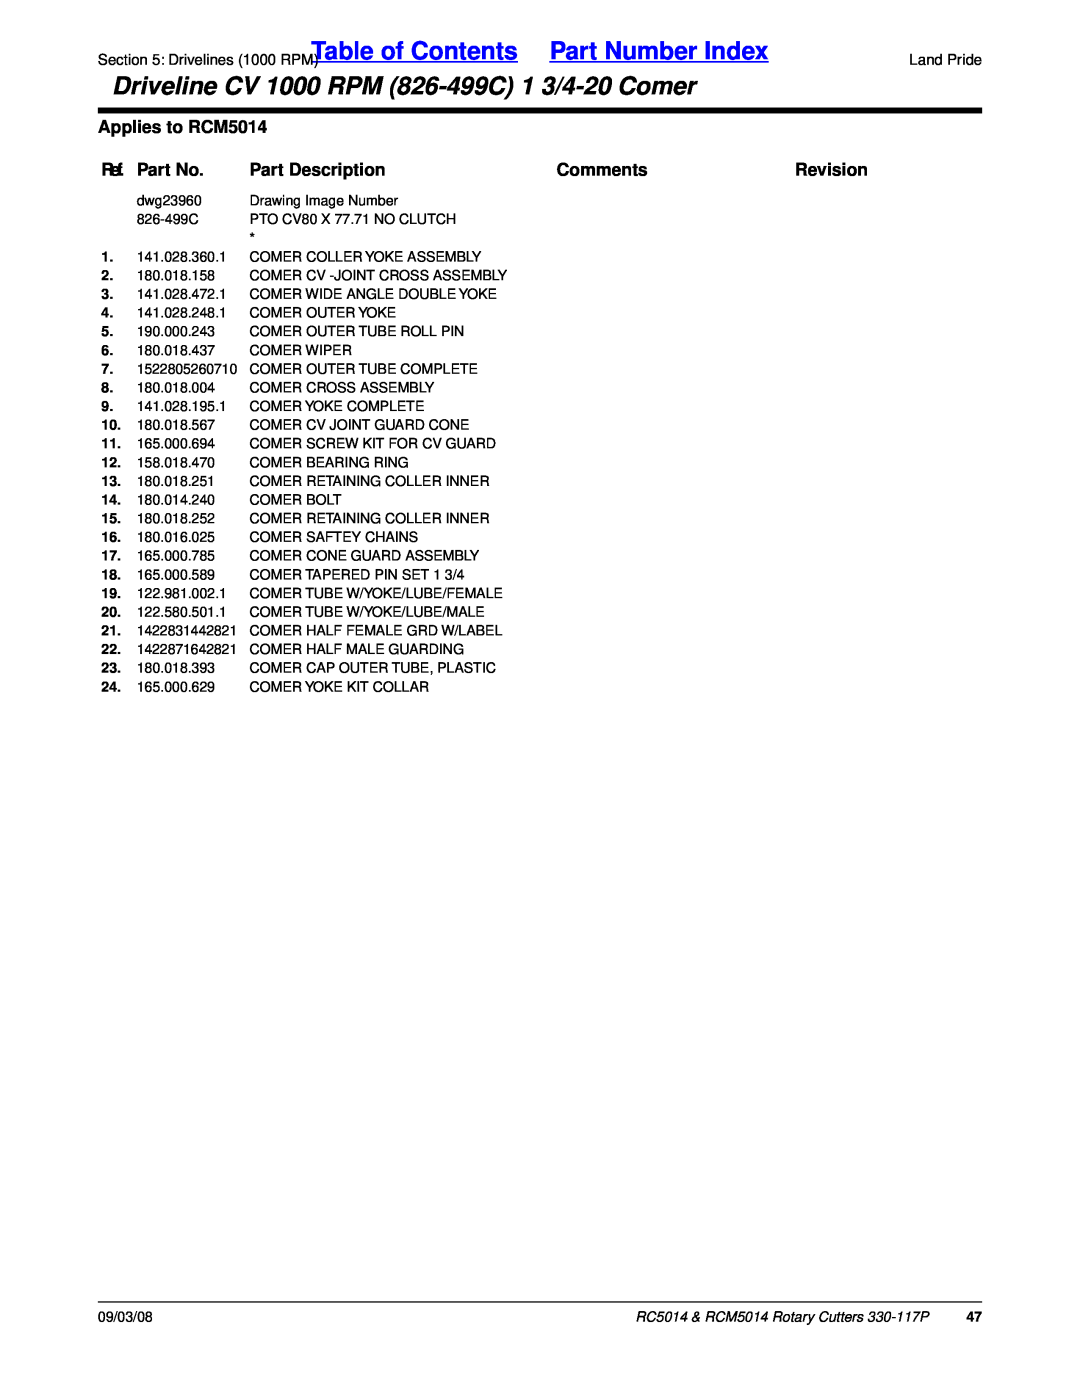 Land Pride manual Table of Contents, Part Number Index, Driveline CV 1000 RPM 826-499C1 3/4-20Comer, Applies to RCM5014 